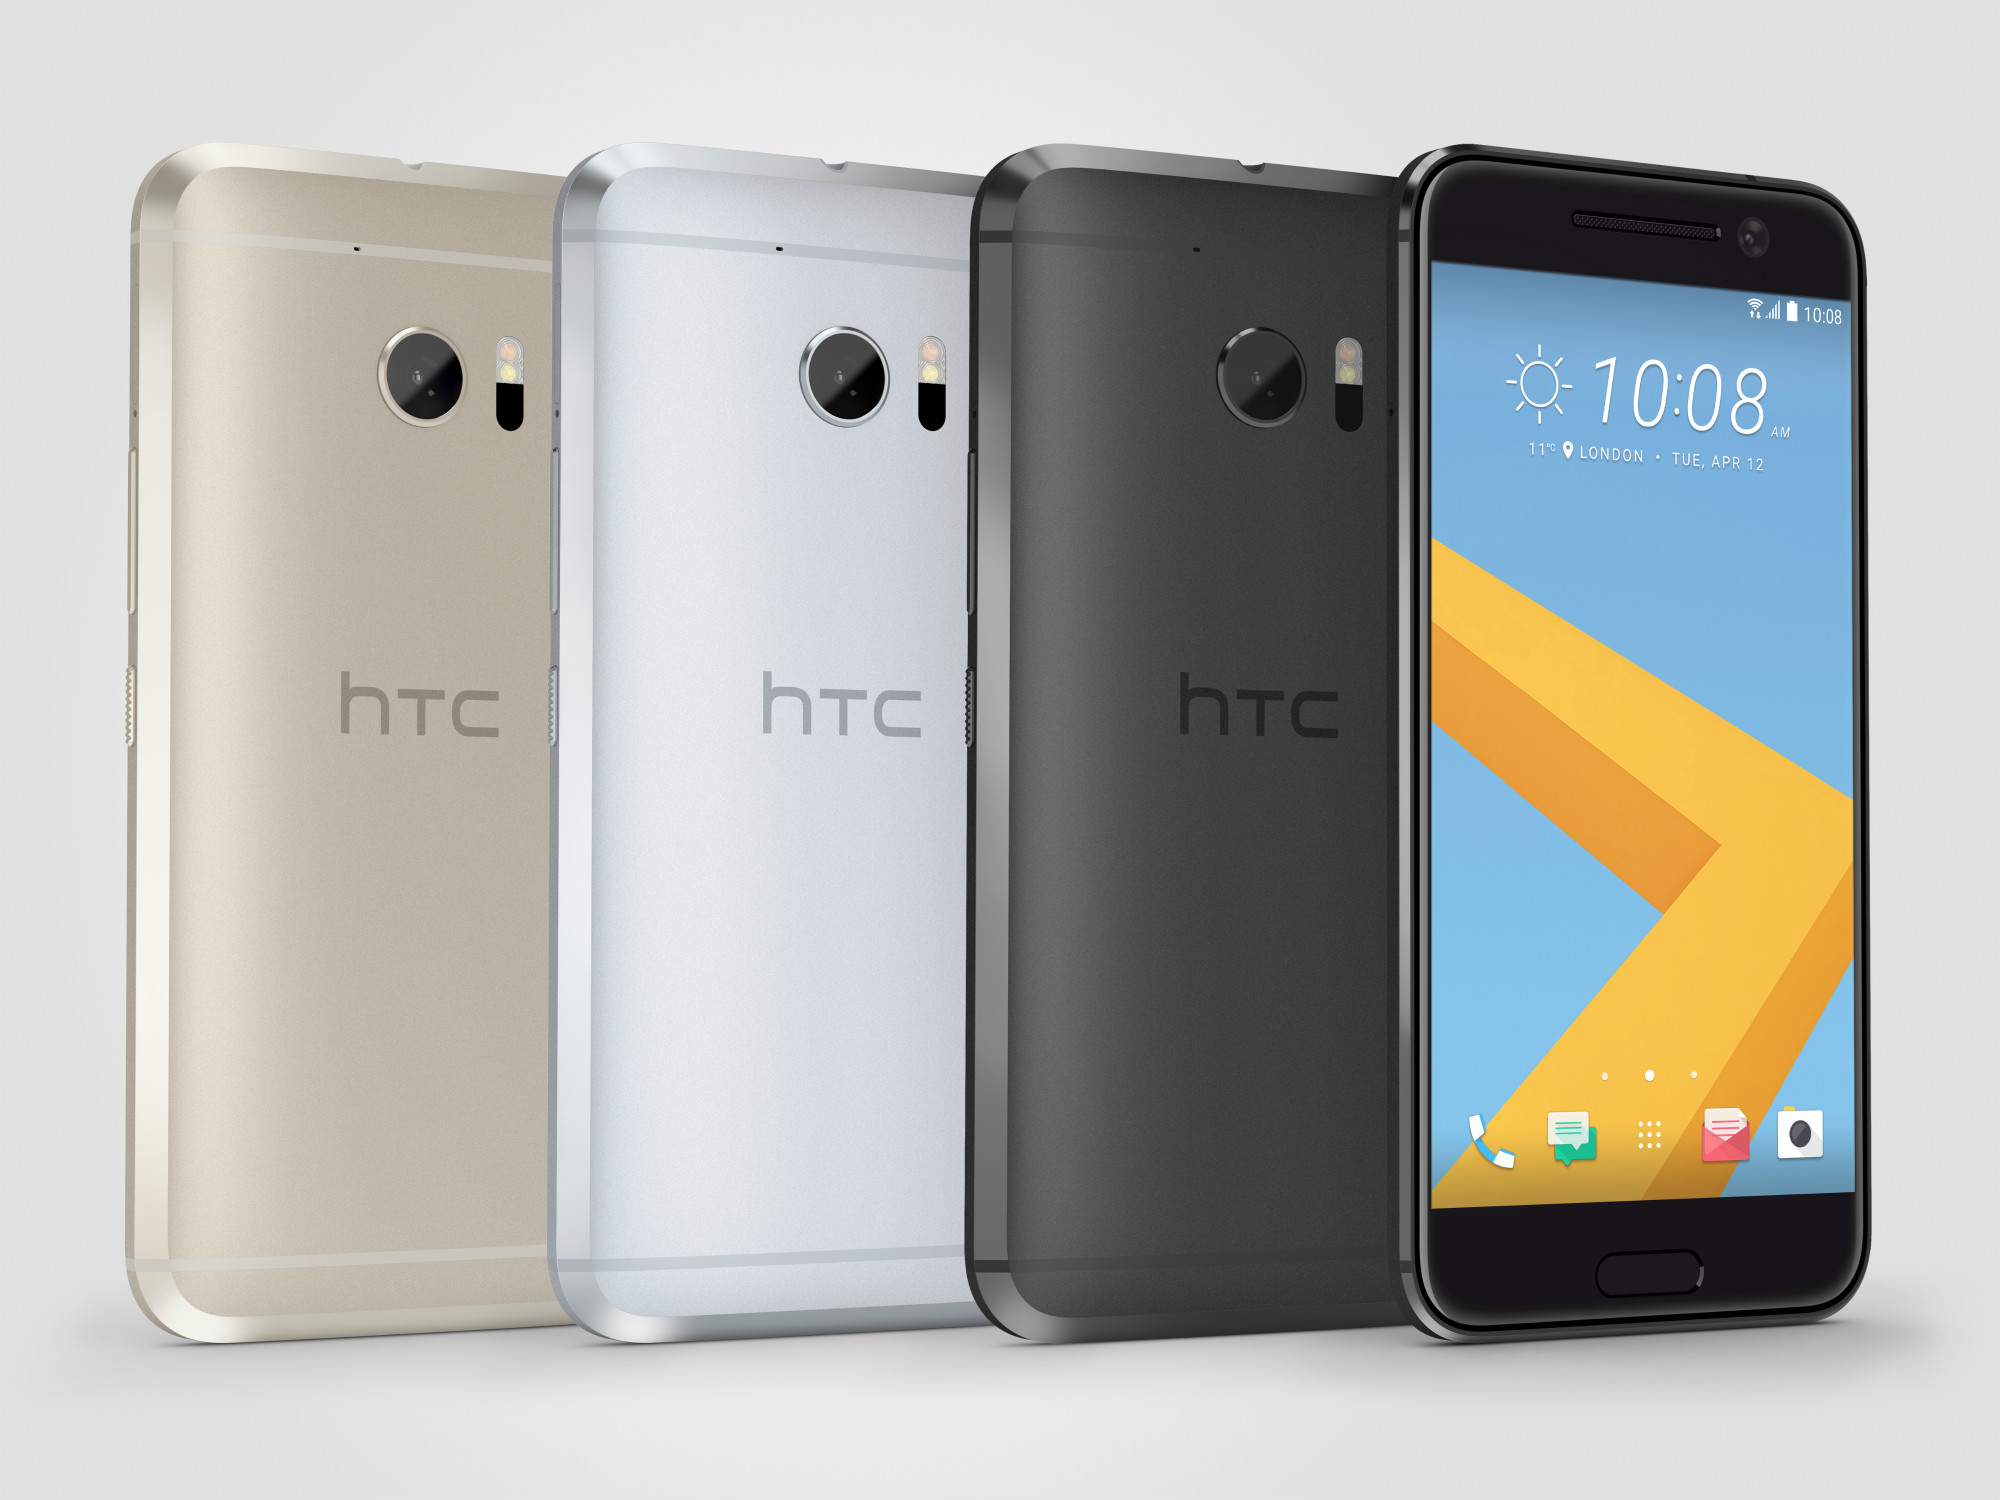 HTC 10 goes official with 12 MP UltraPixel Camera